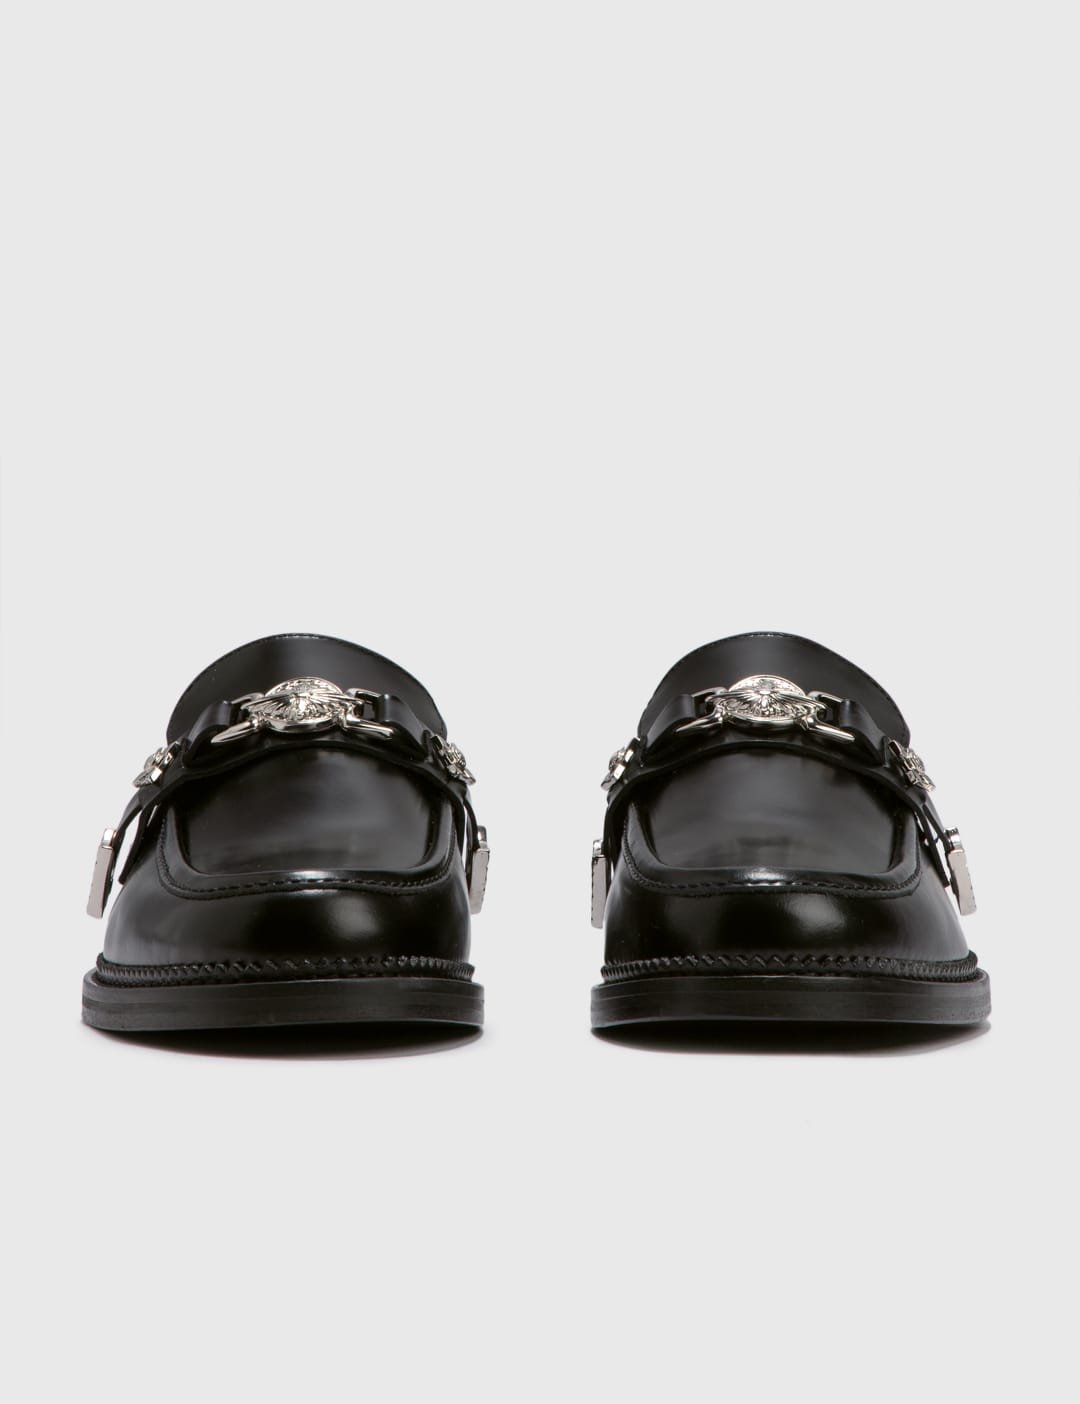 Toga Virilis - BUCKLED STRAP LOAFERS | HBX - Globally Curated